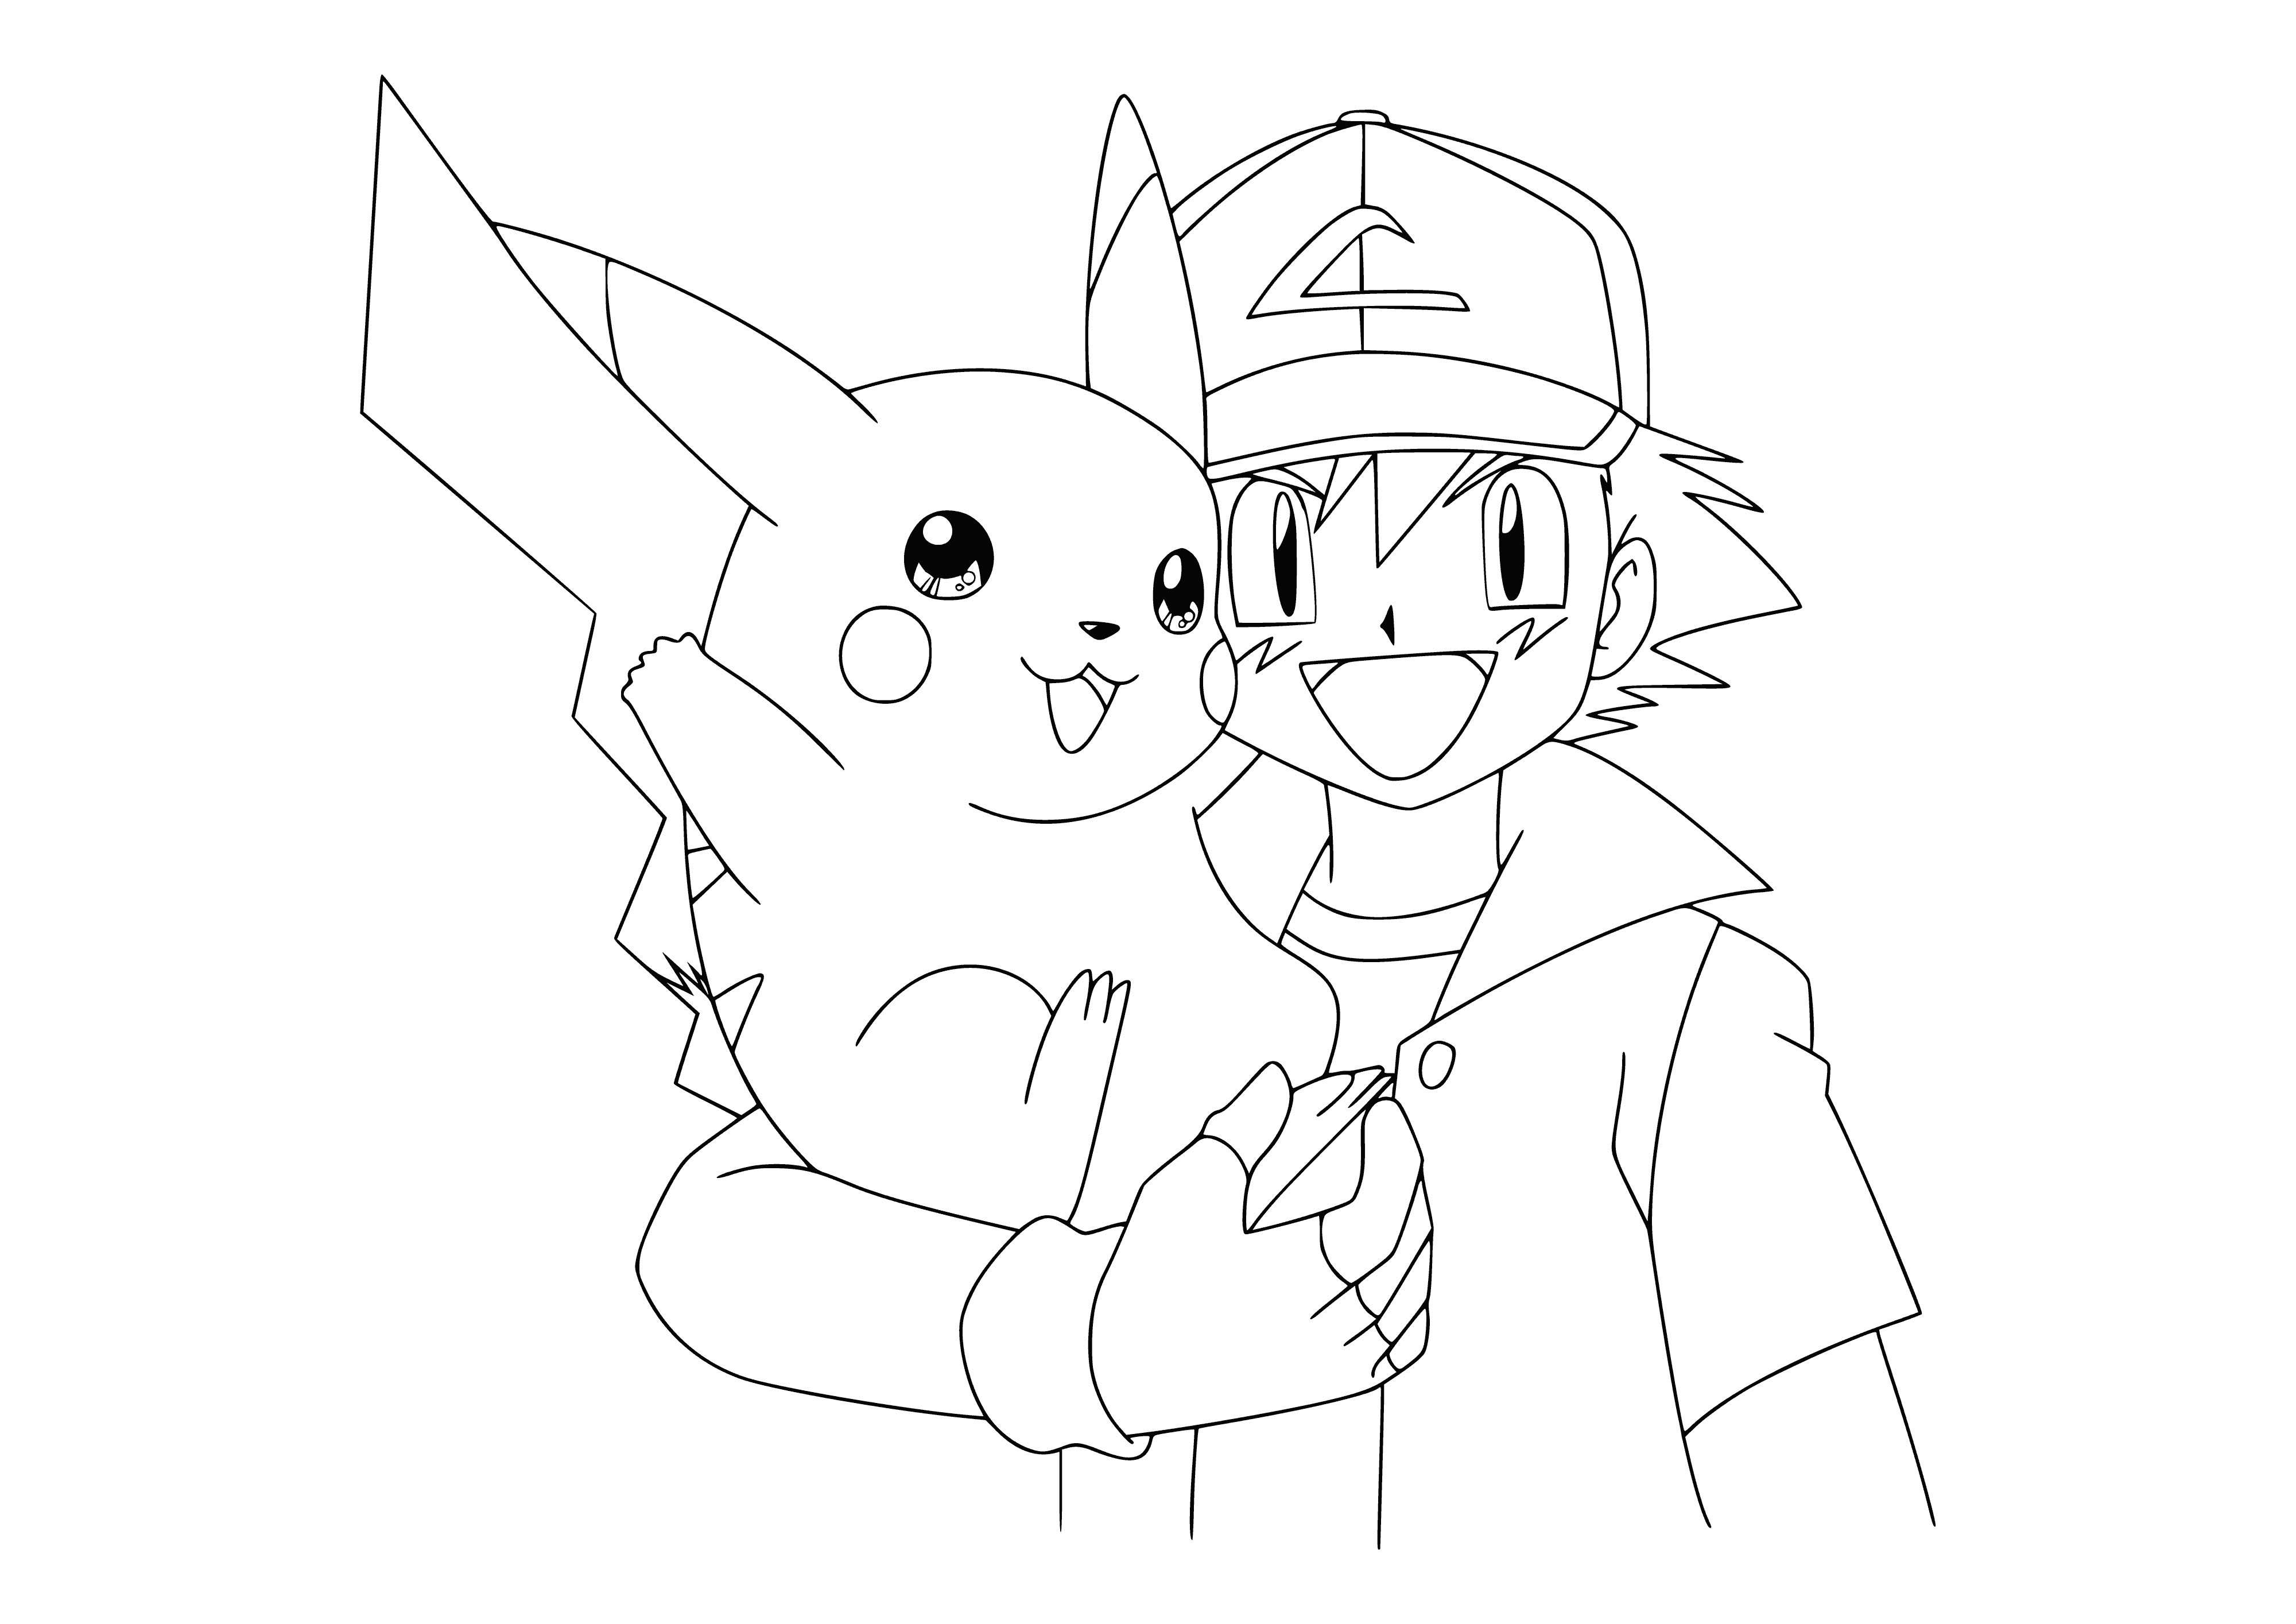 Pikachu and Ash coloring page